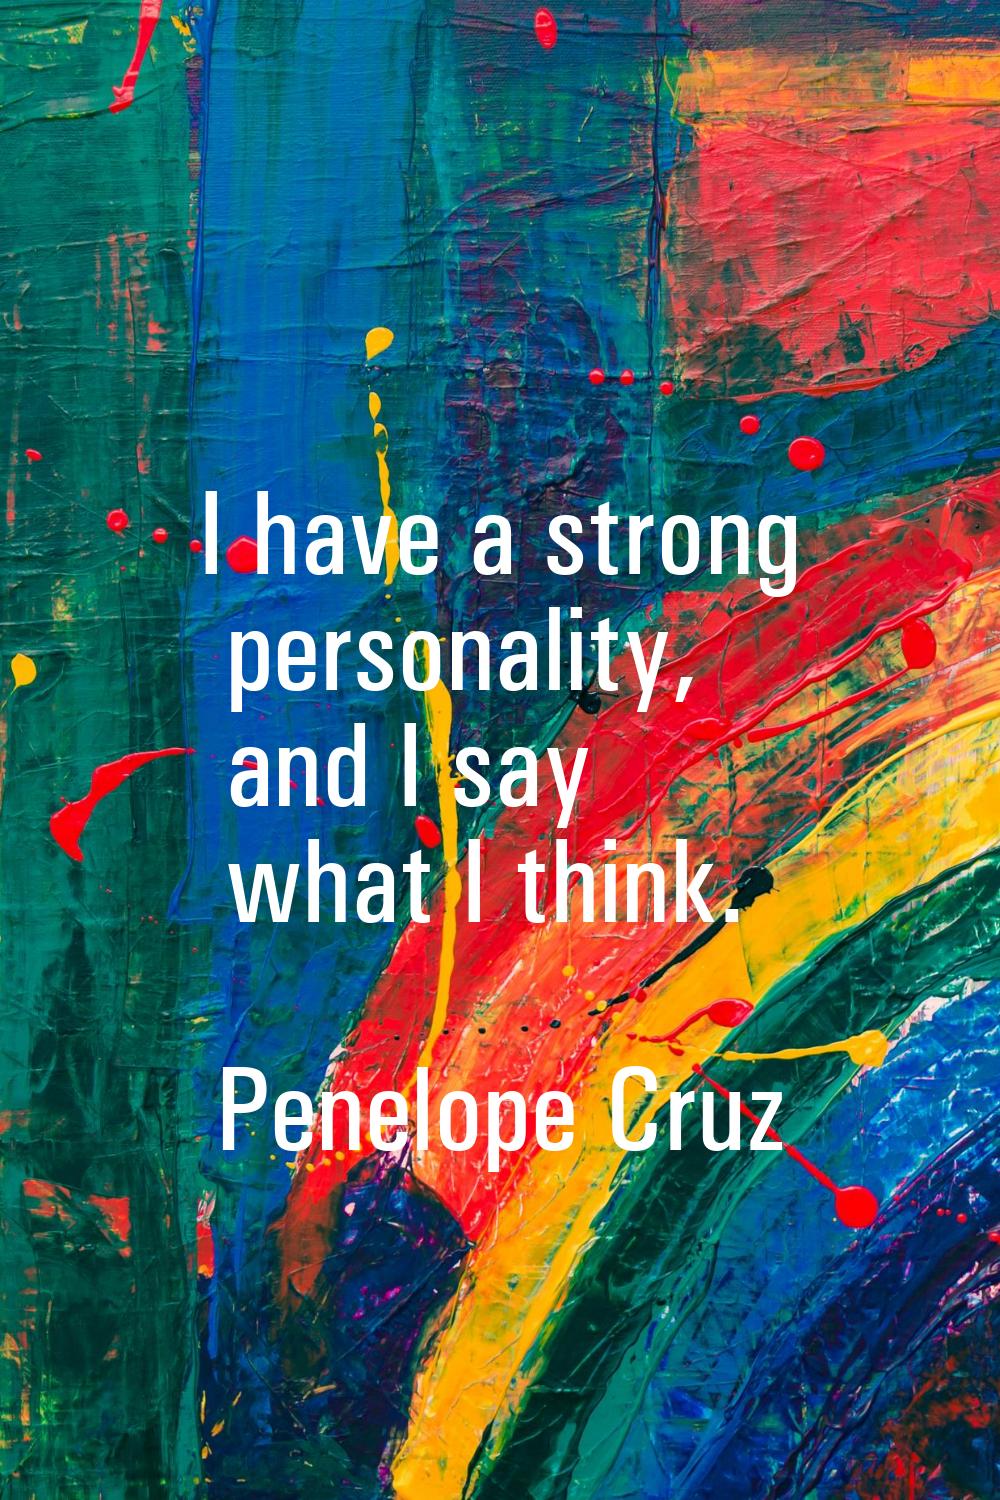 I have a strong personality, and I say what I think.